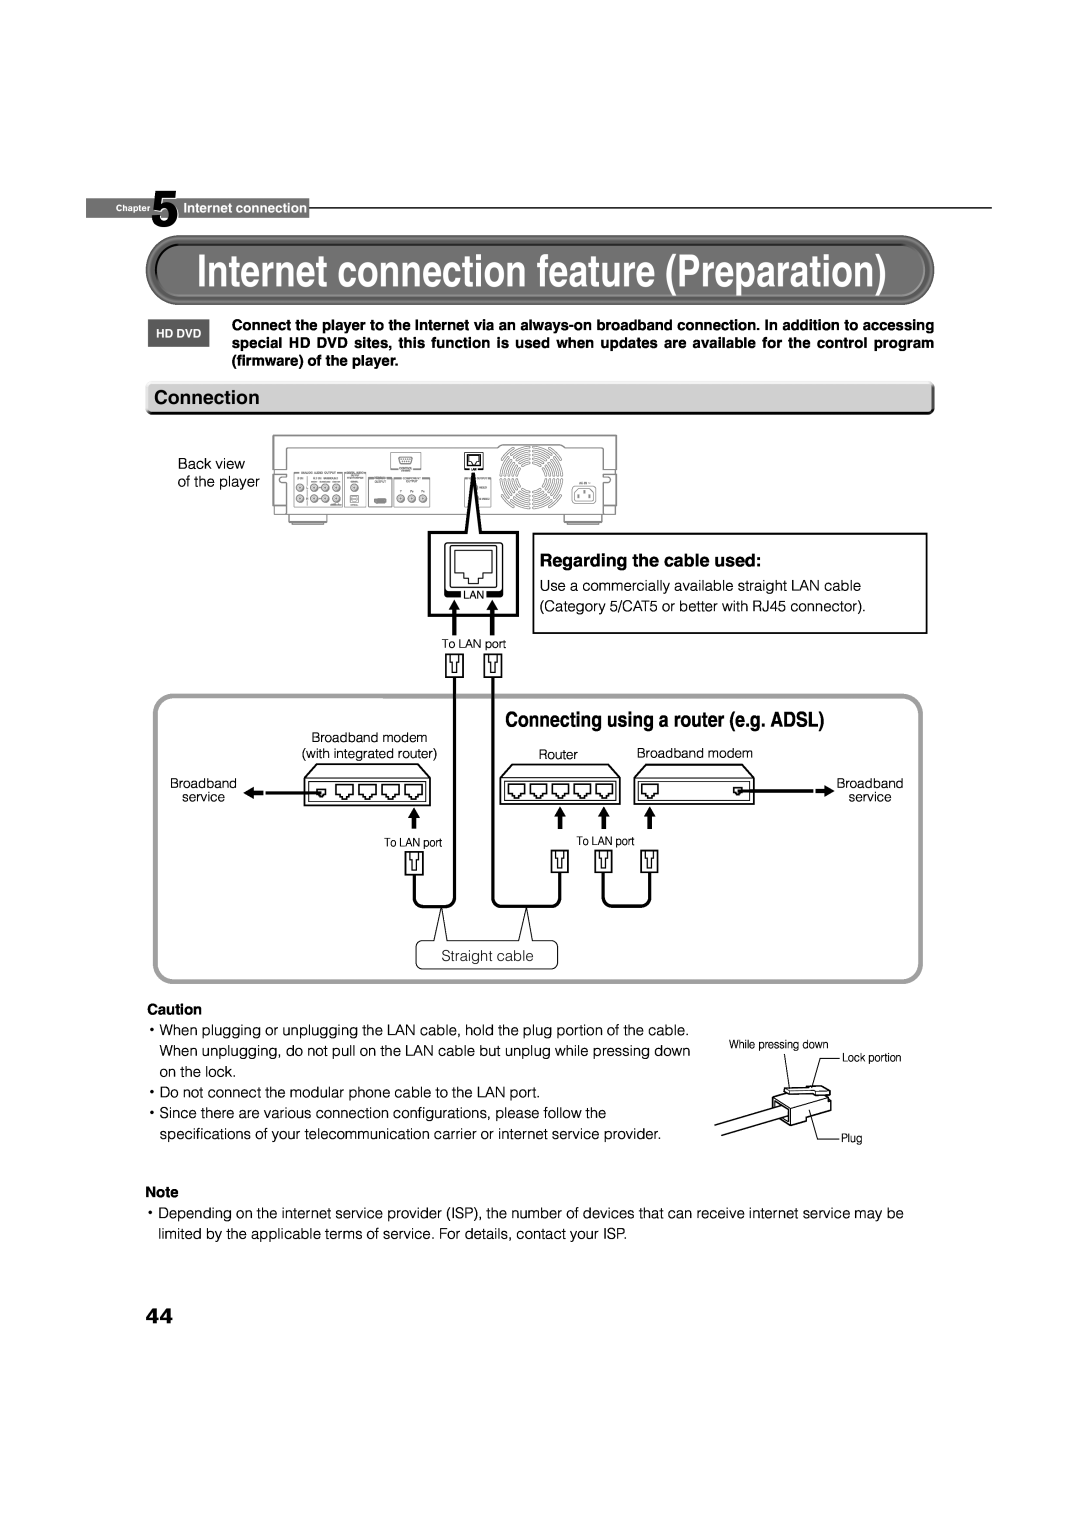 Toshiba HD-XA1, hd-xa1kn Internet connection feature Preparation, Connecting using a router e.g. ADSL, Connection 